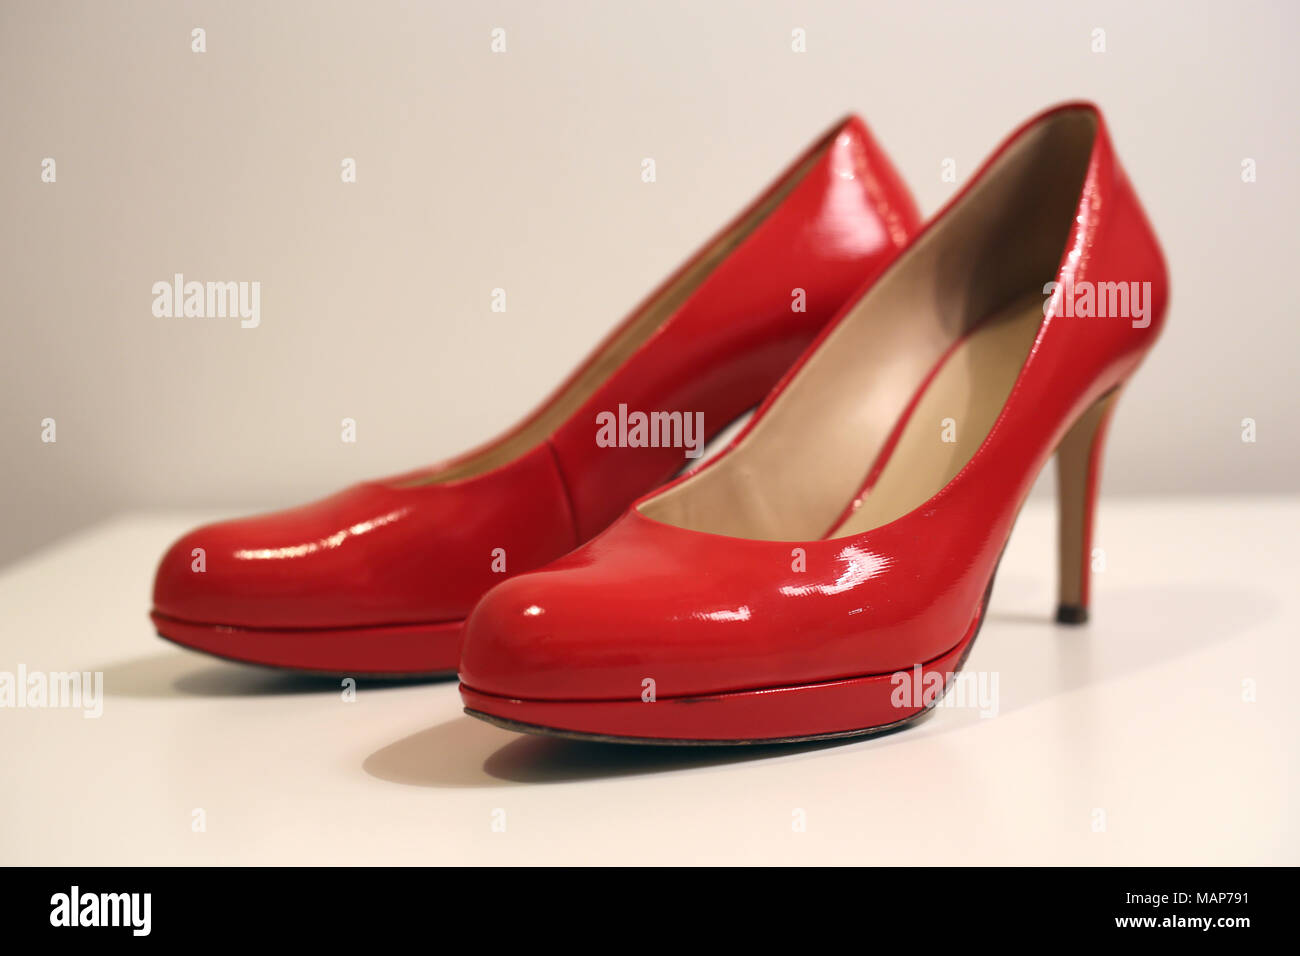 A stil life of a pair of high heels on a white table. Shoes are red shiny leather shoes and the background is white. Stock Photo